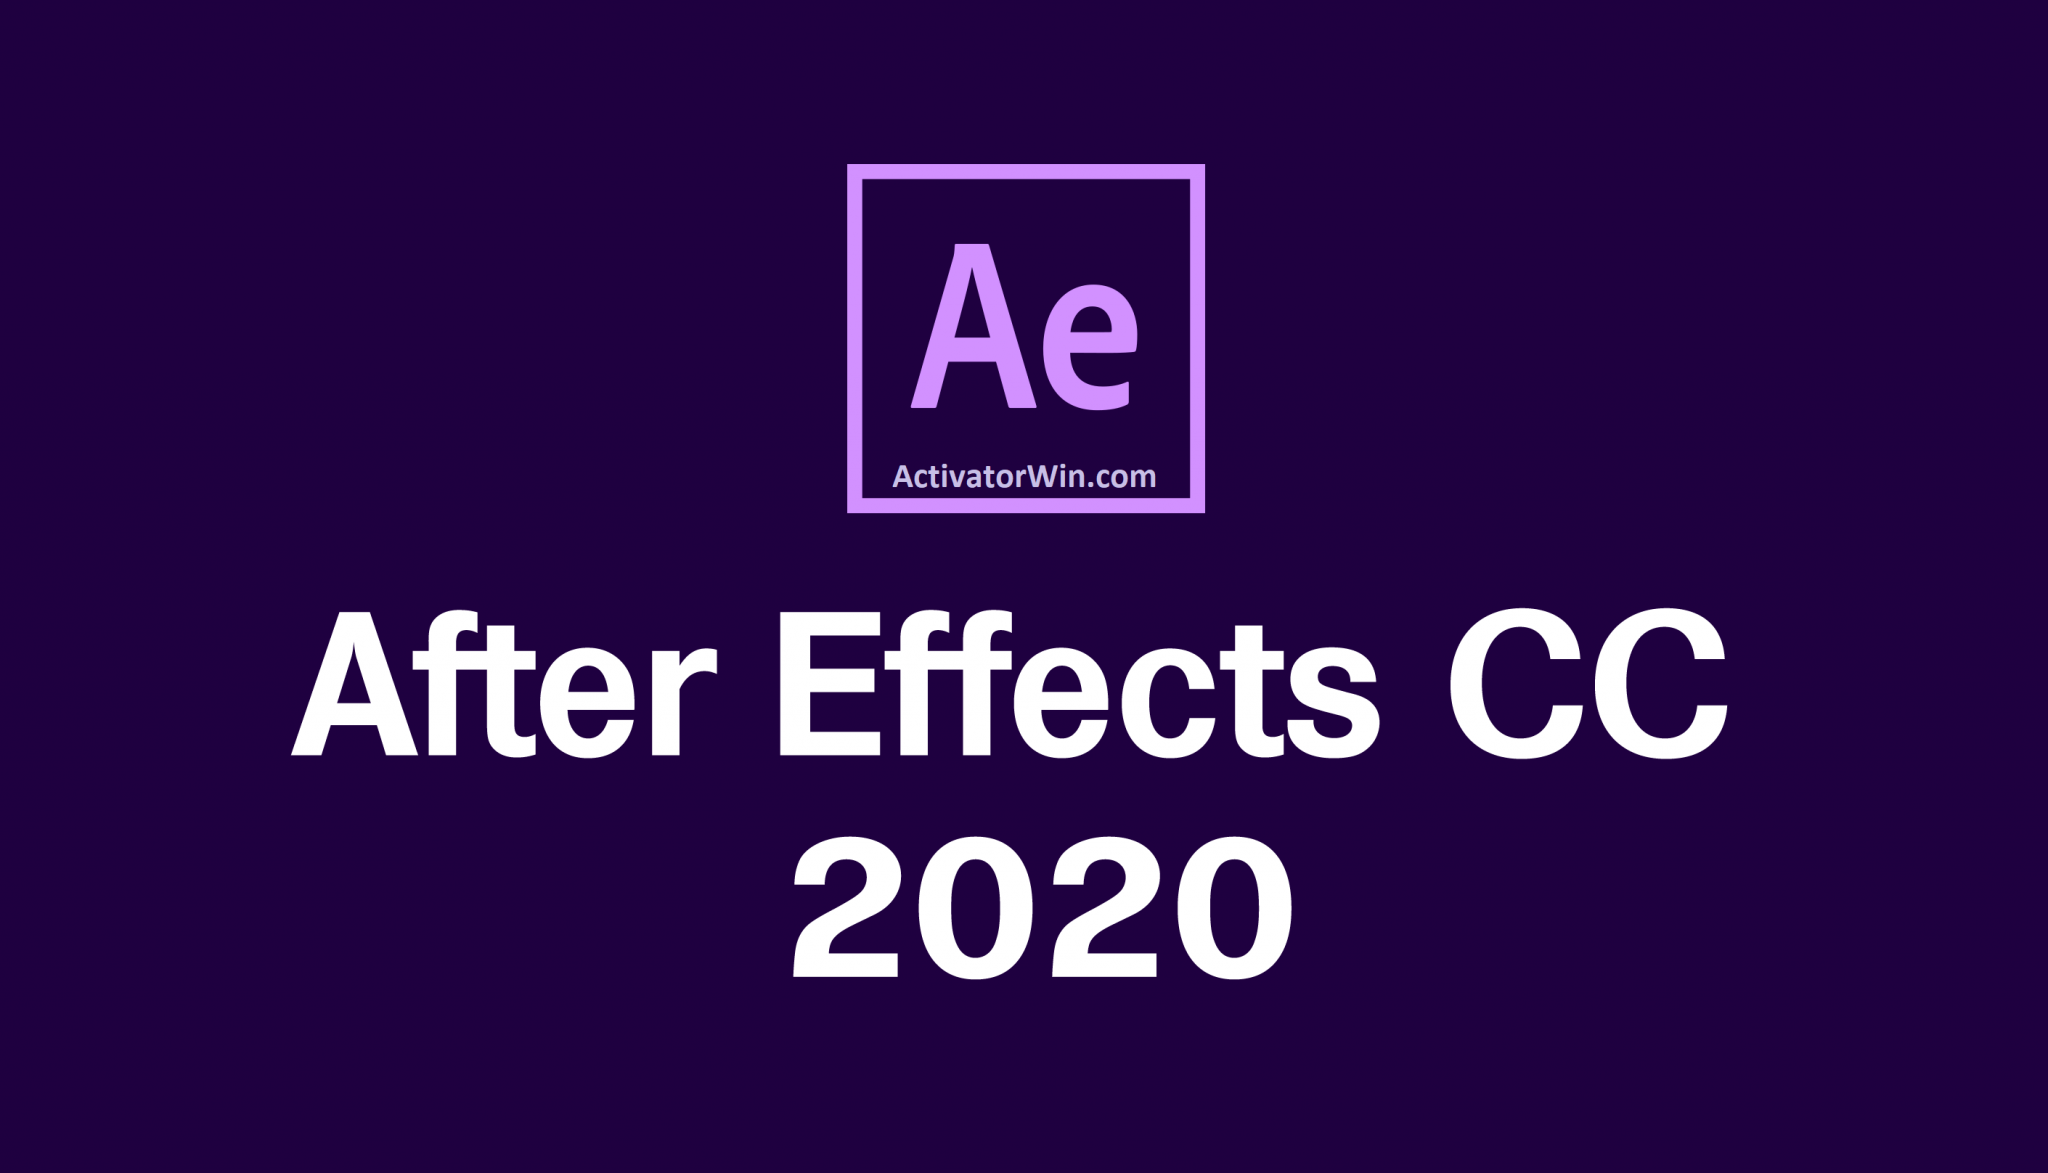 aftercodecs after effects 2020